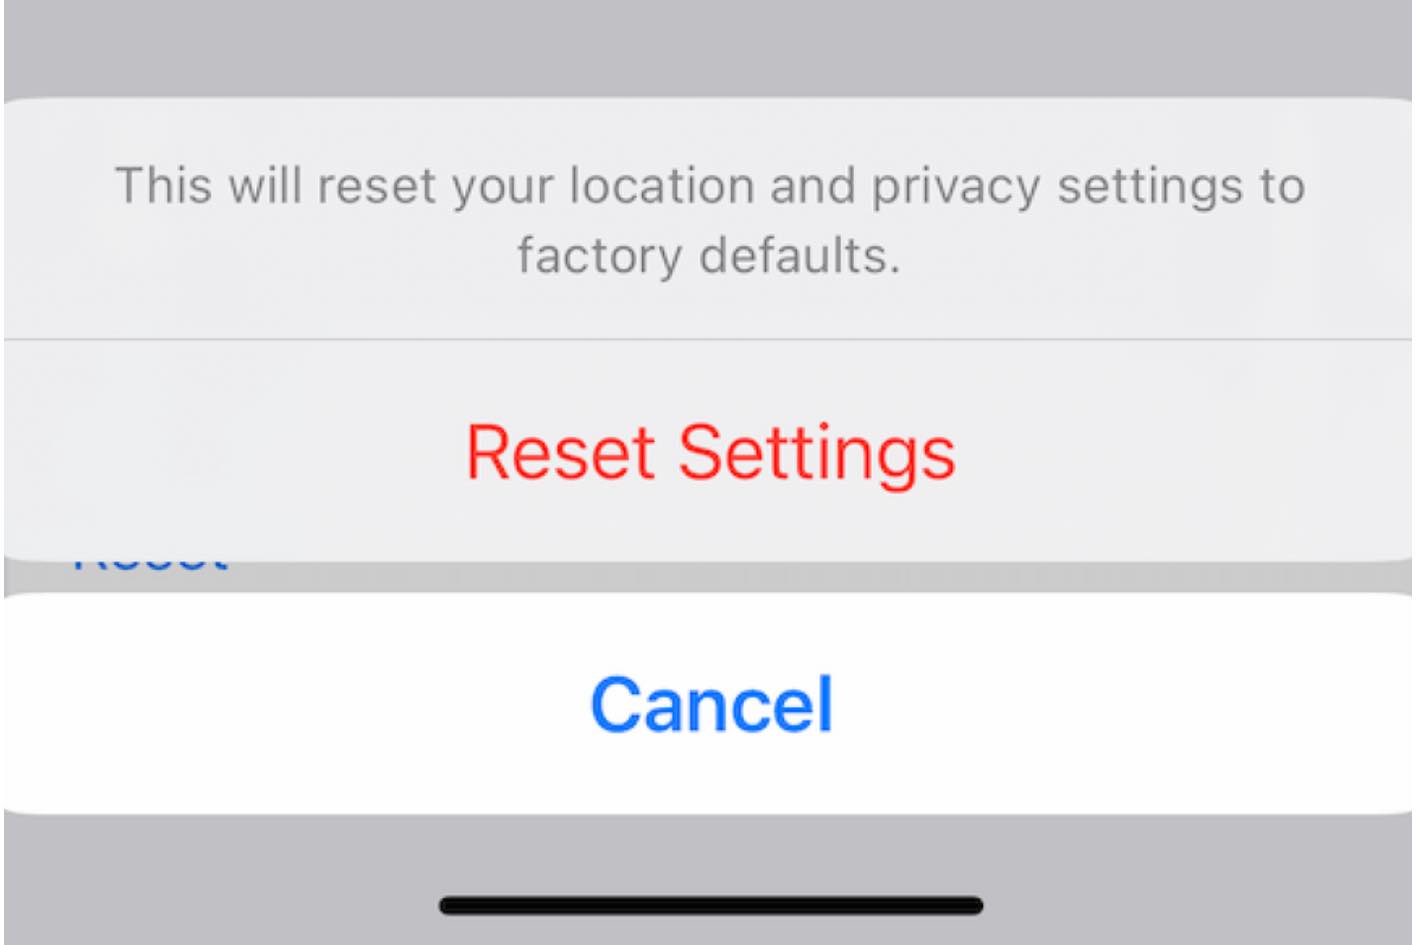 What happens if I reset my location settings?